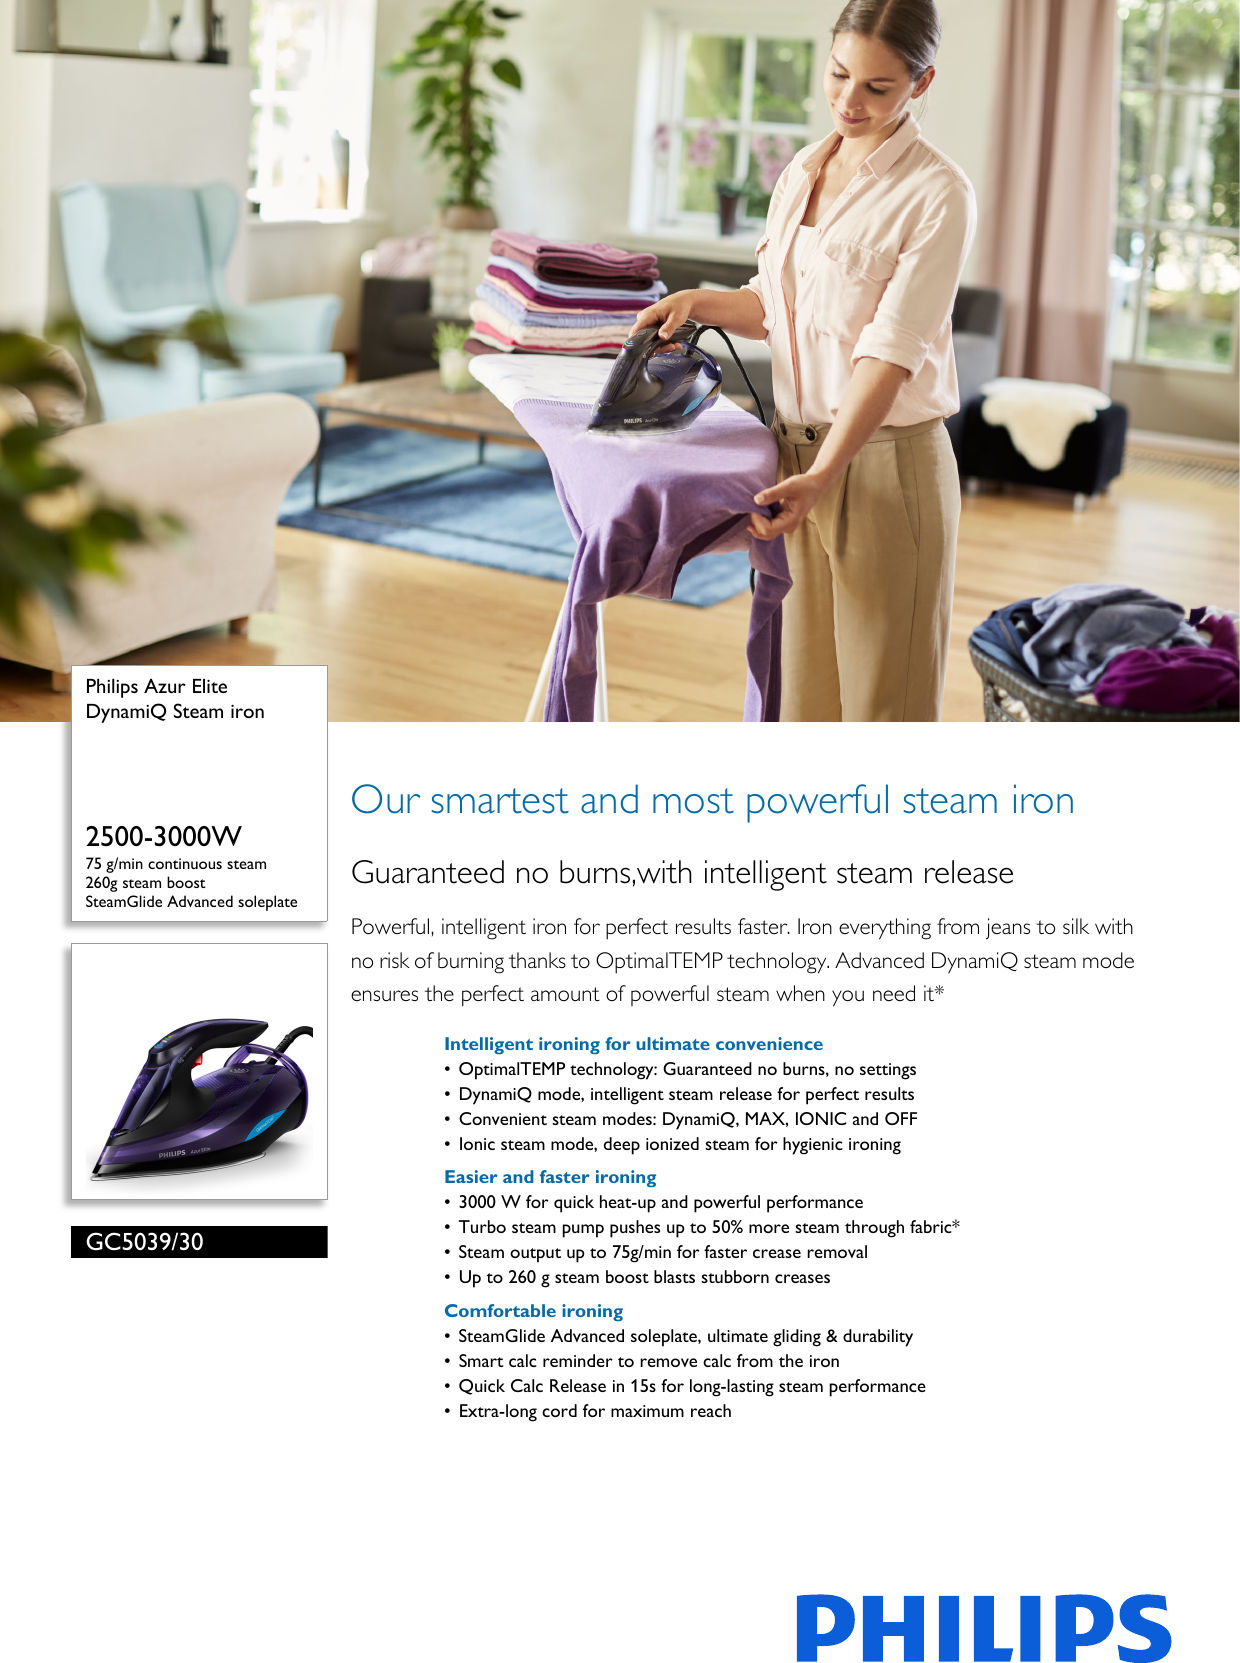 Page 1 of 3 - Philips GC5039/30 DynamiQ Steam Iron User Manual Leaflet Gc5039 30 Pss Aenhk